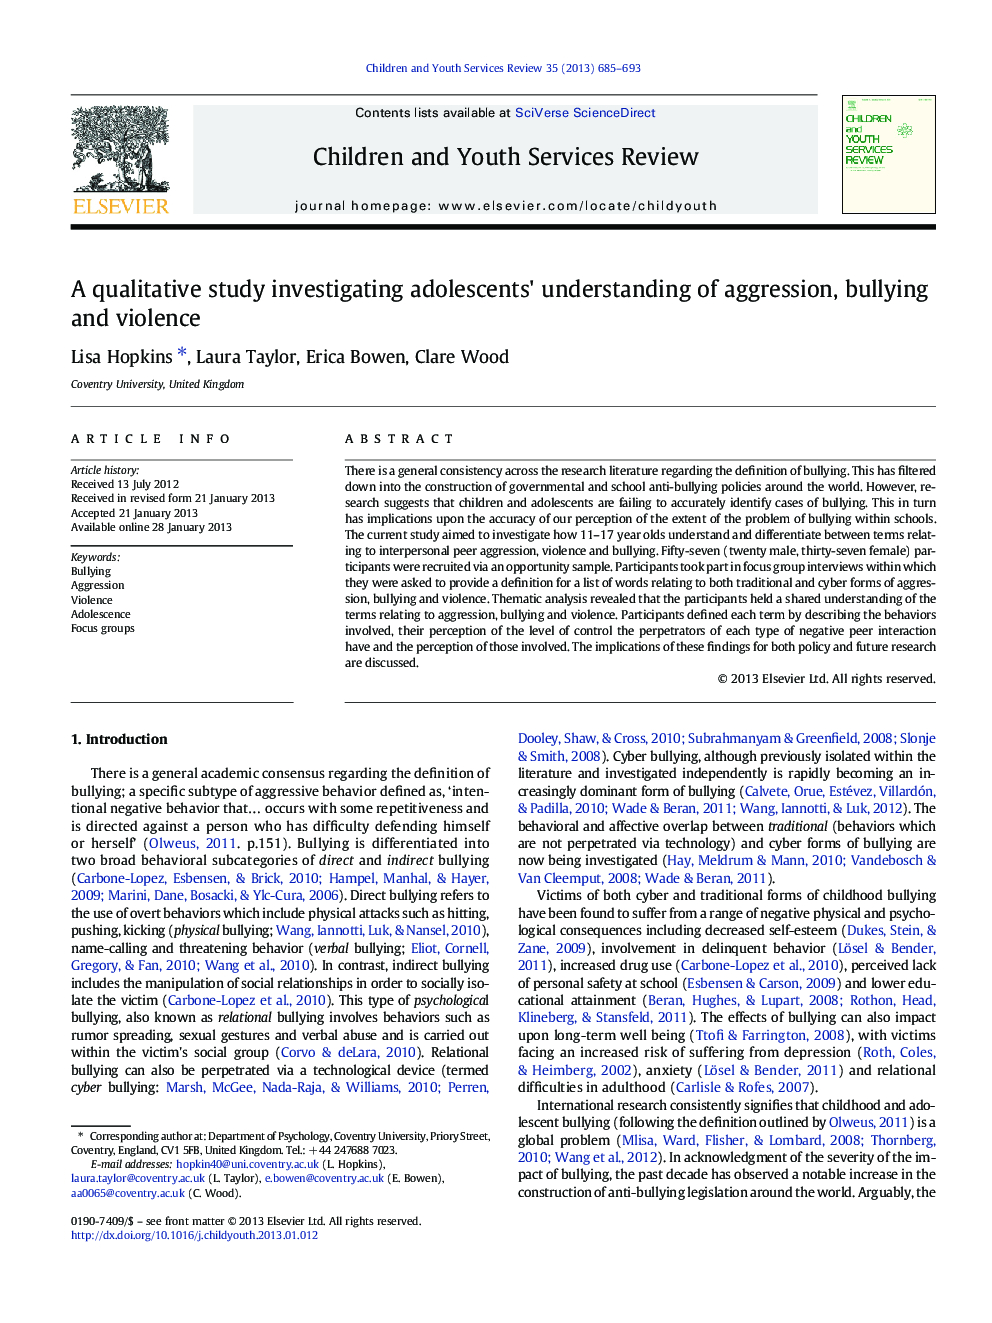 A qualitative study investigating adolescents' understanding of aggression, bullying and violence